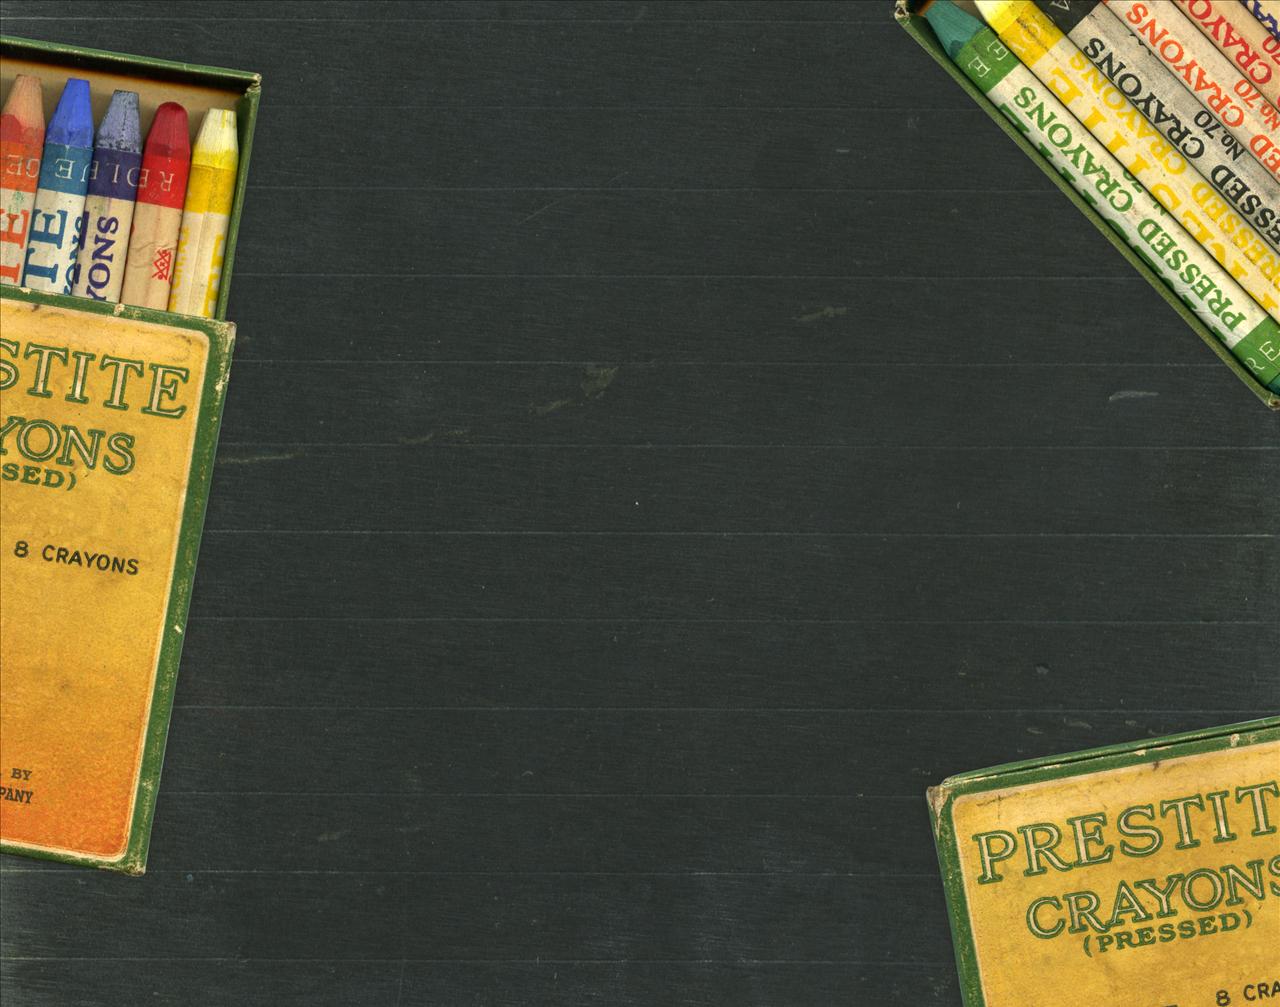 Crayons - Vintage Schoolhouse free powerpoint background